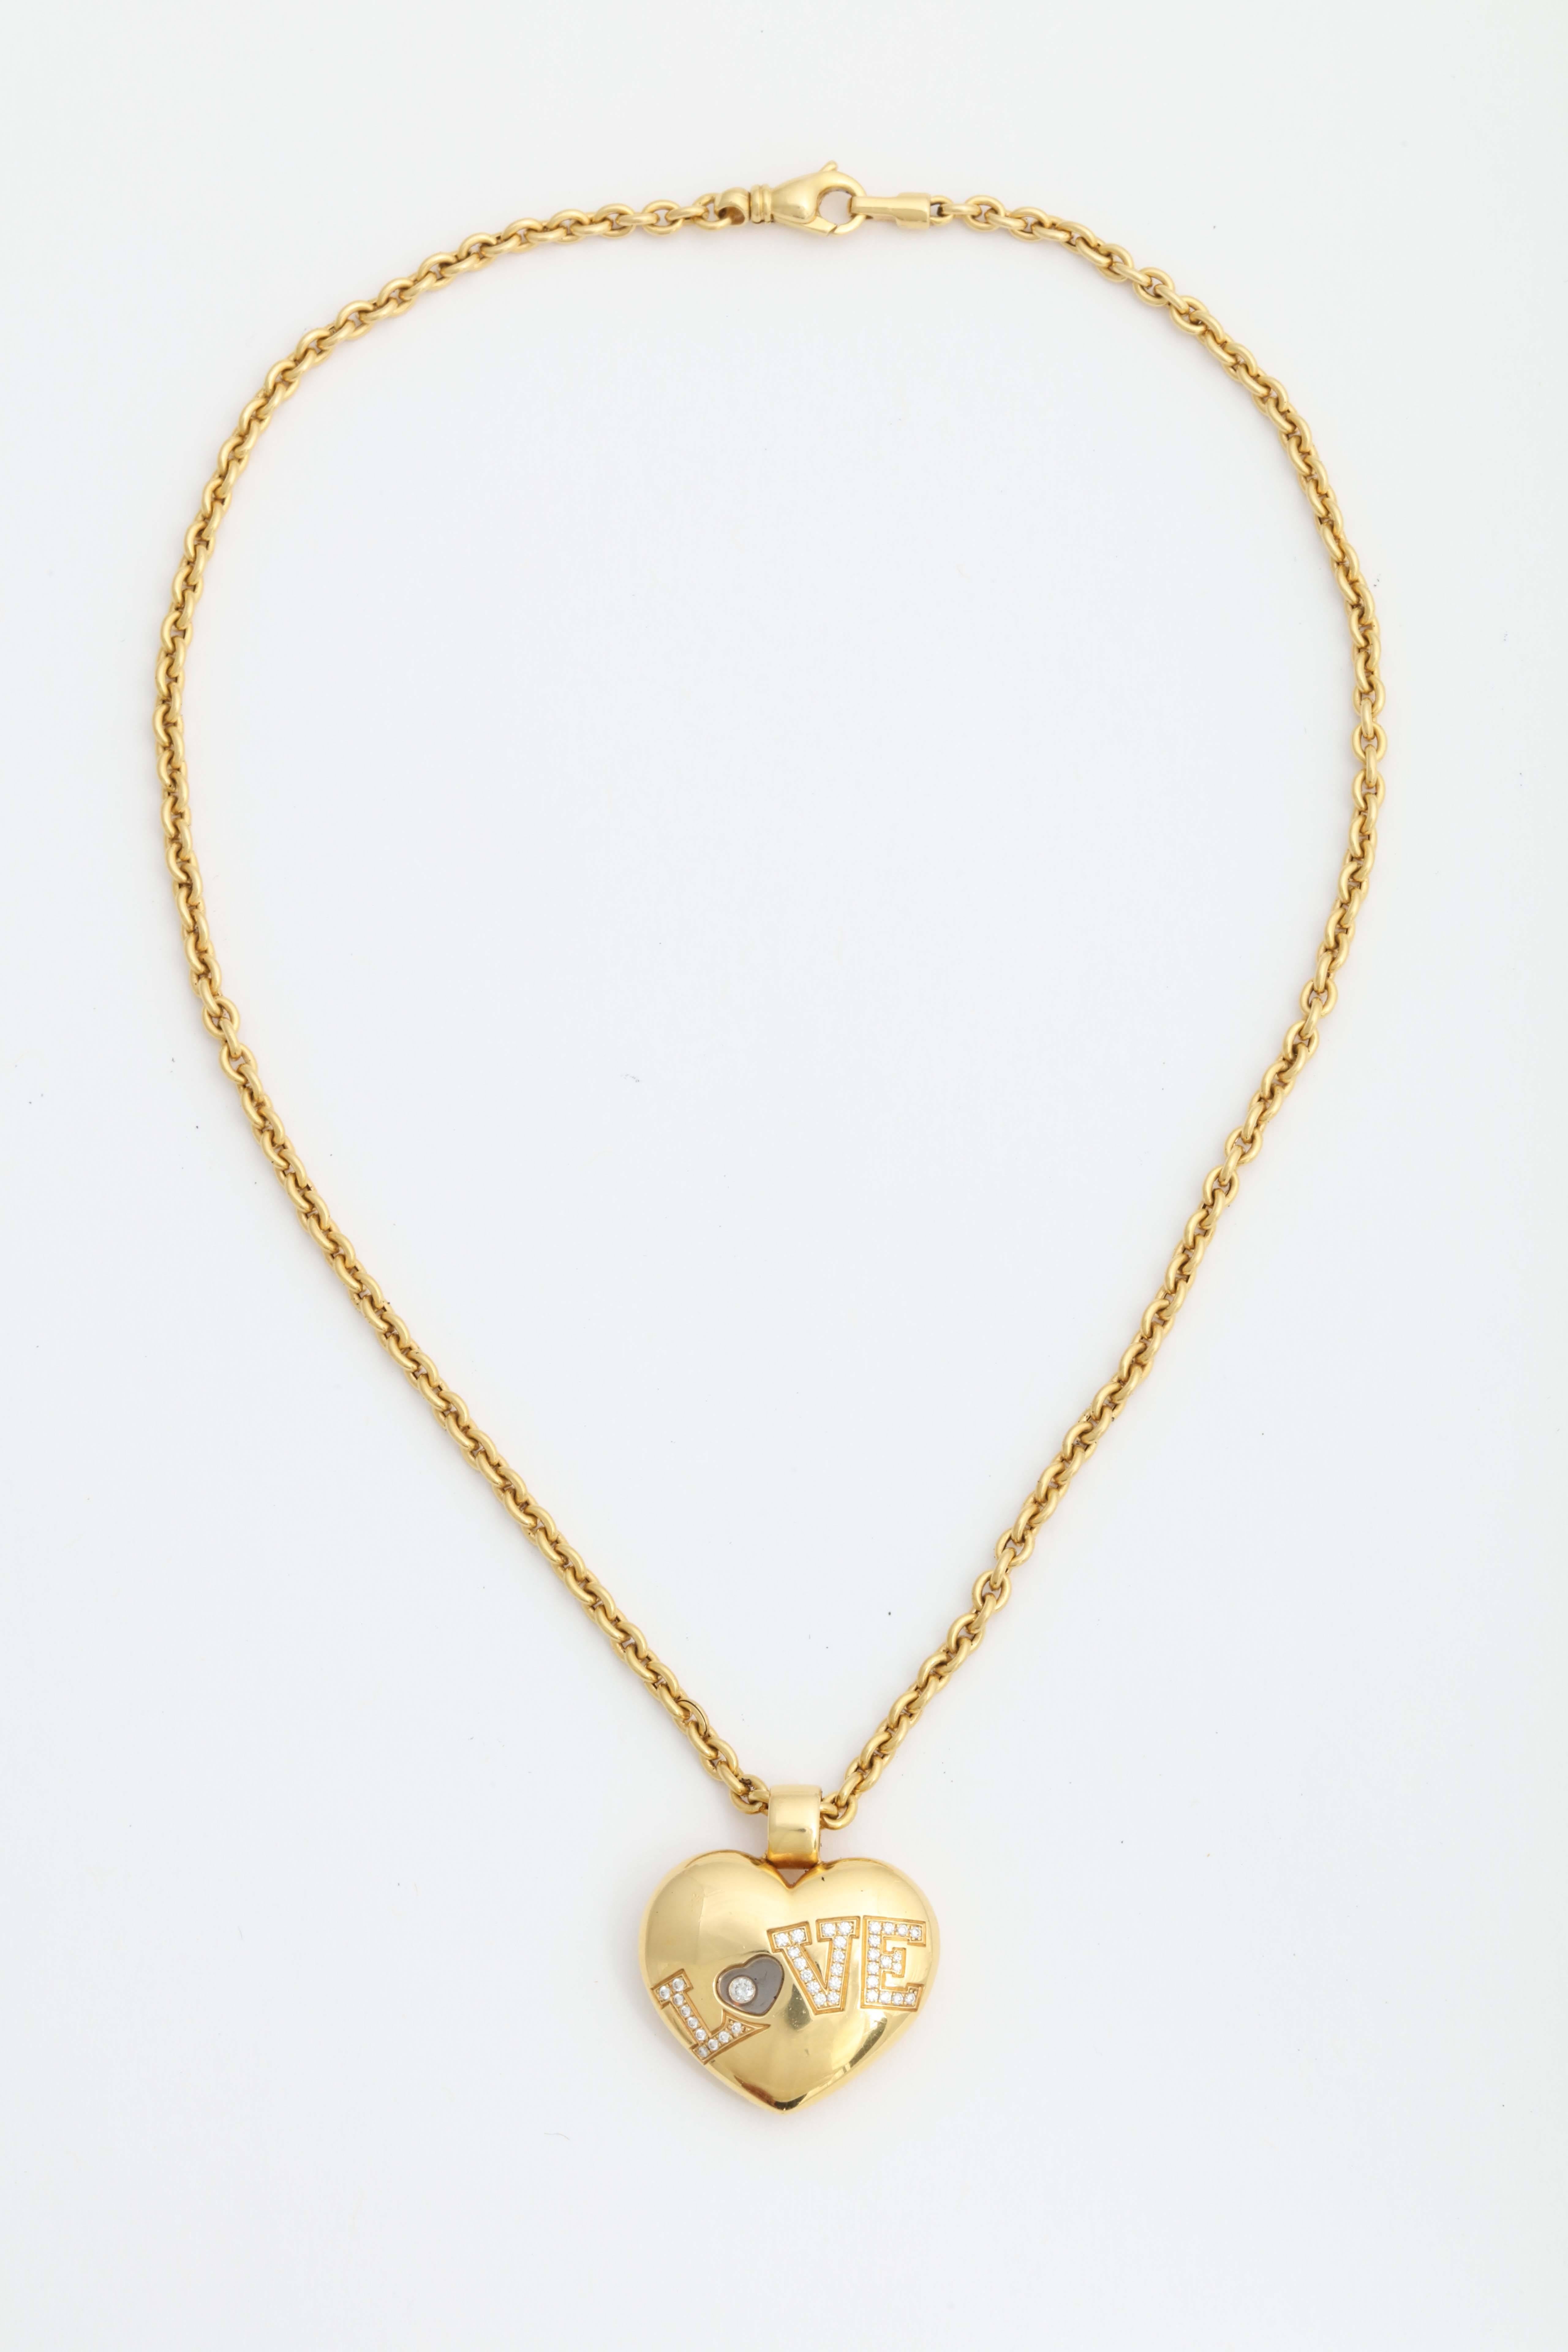 Beautiful Chopard 18k gold “Love” necklace with happy diamonds.

The chain is non-brand, 18k gold.